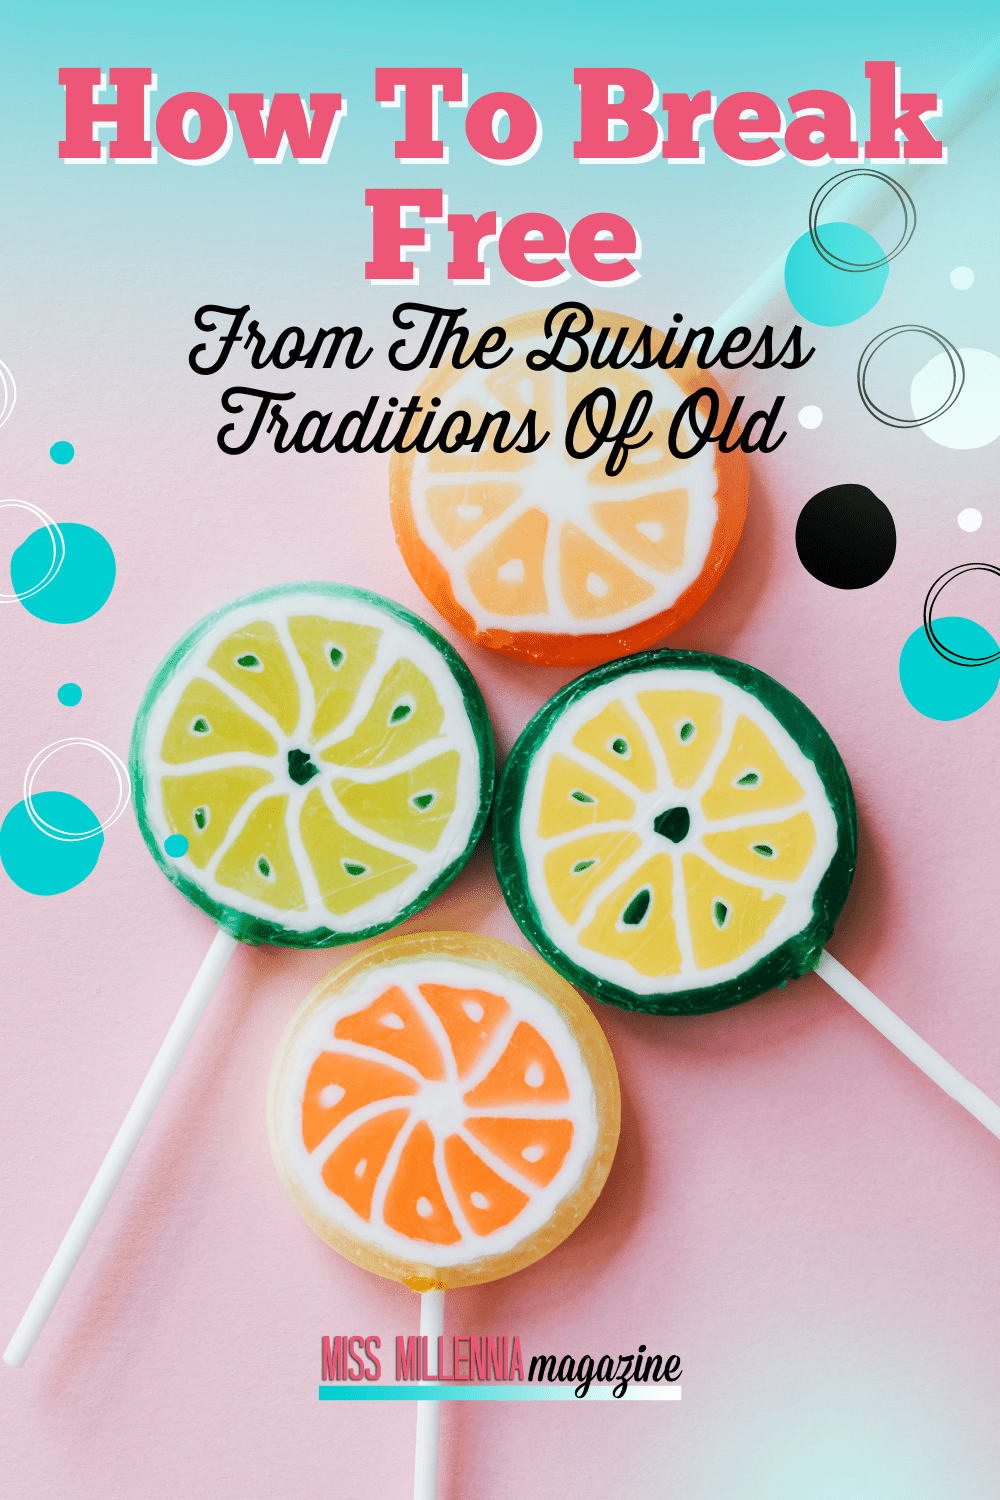 How To Break Free From The Business Traditions Of Old